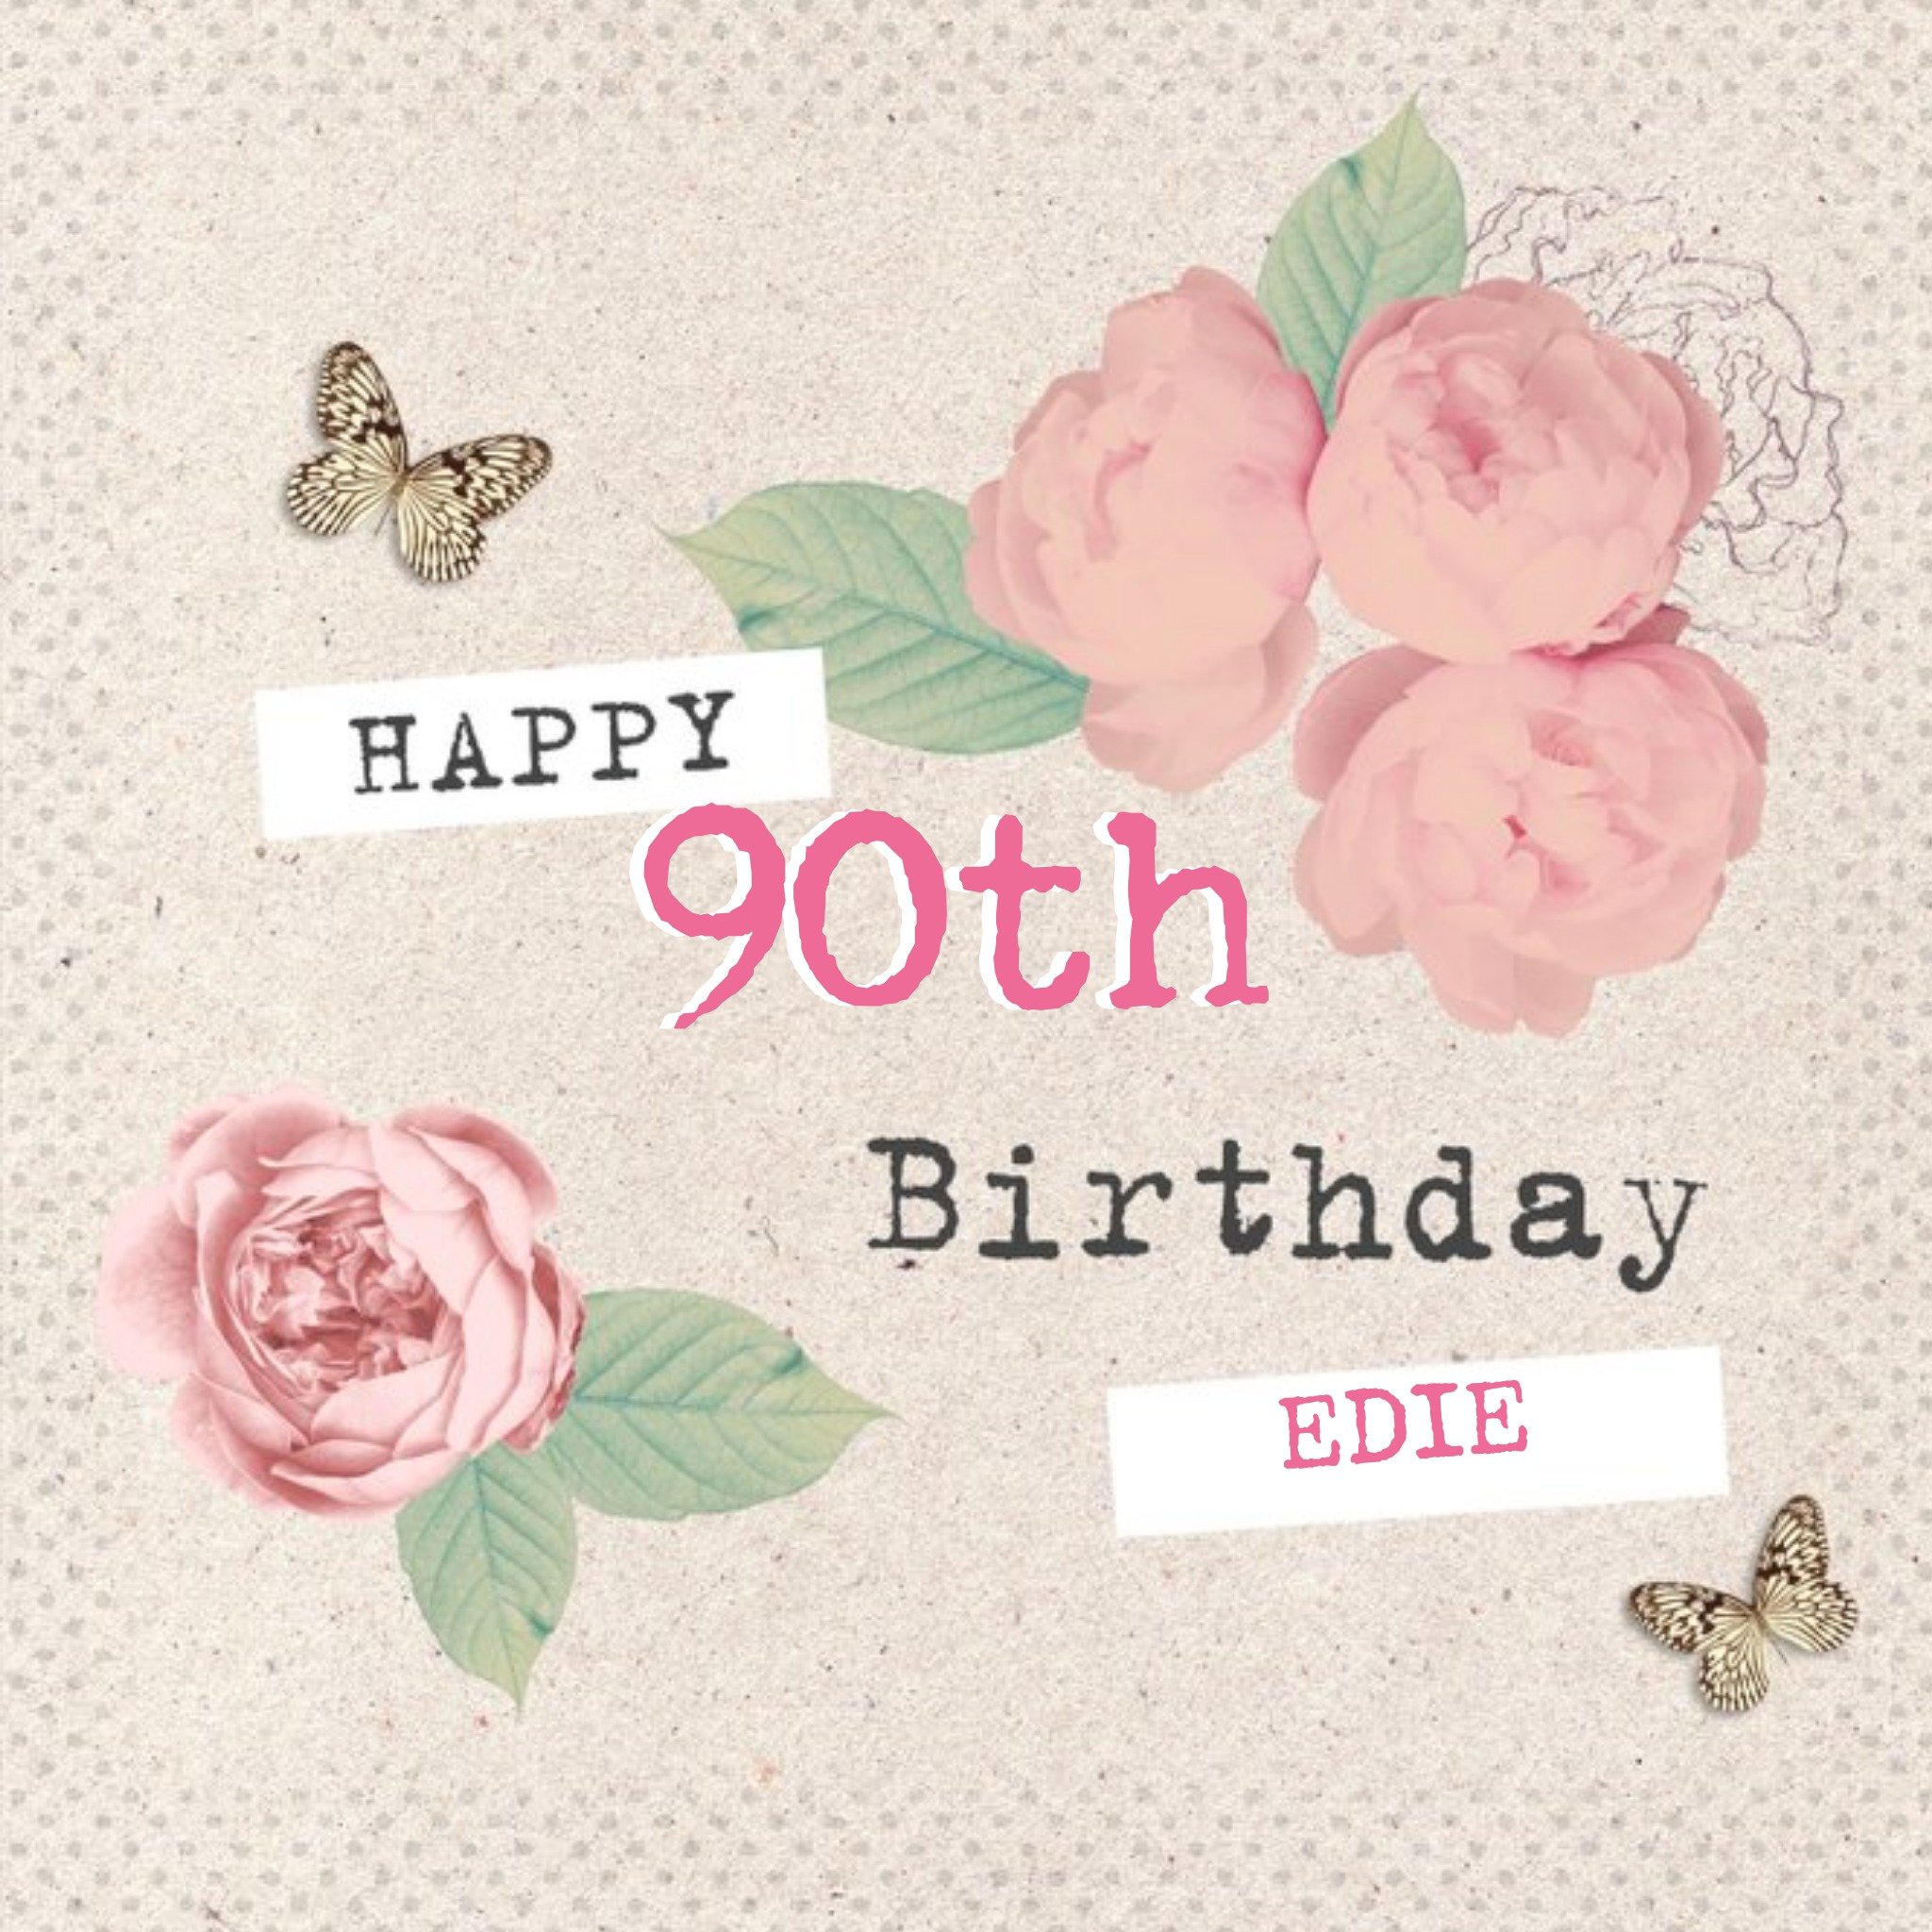 Moonpig Vintage Roses And Fluttering Butterflies Happy 90th Birthday Card, Square